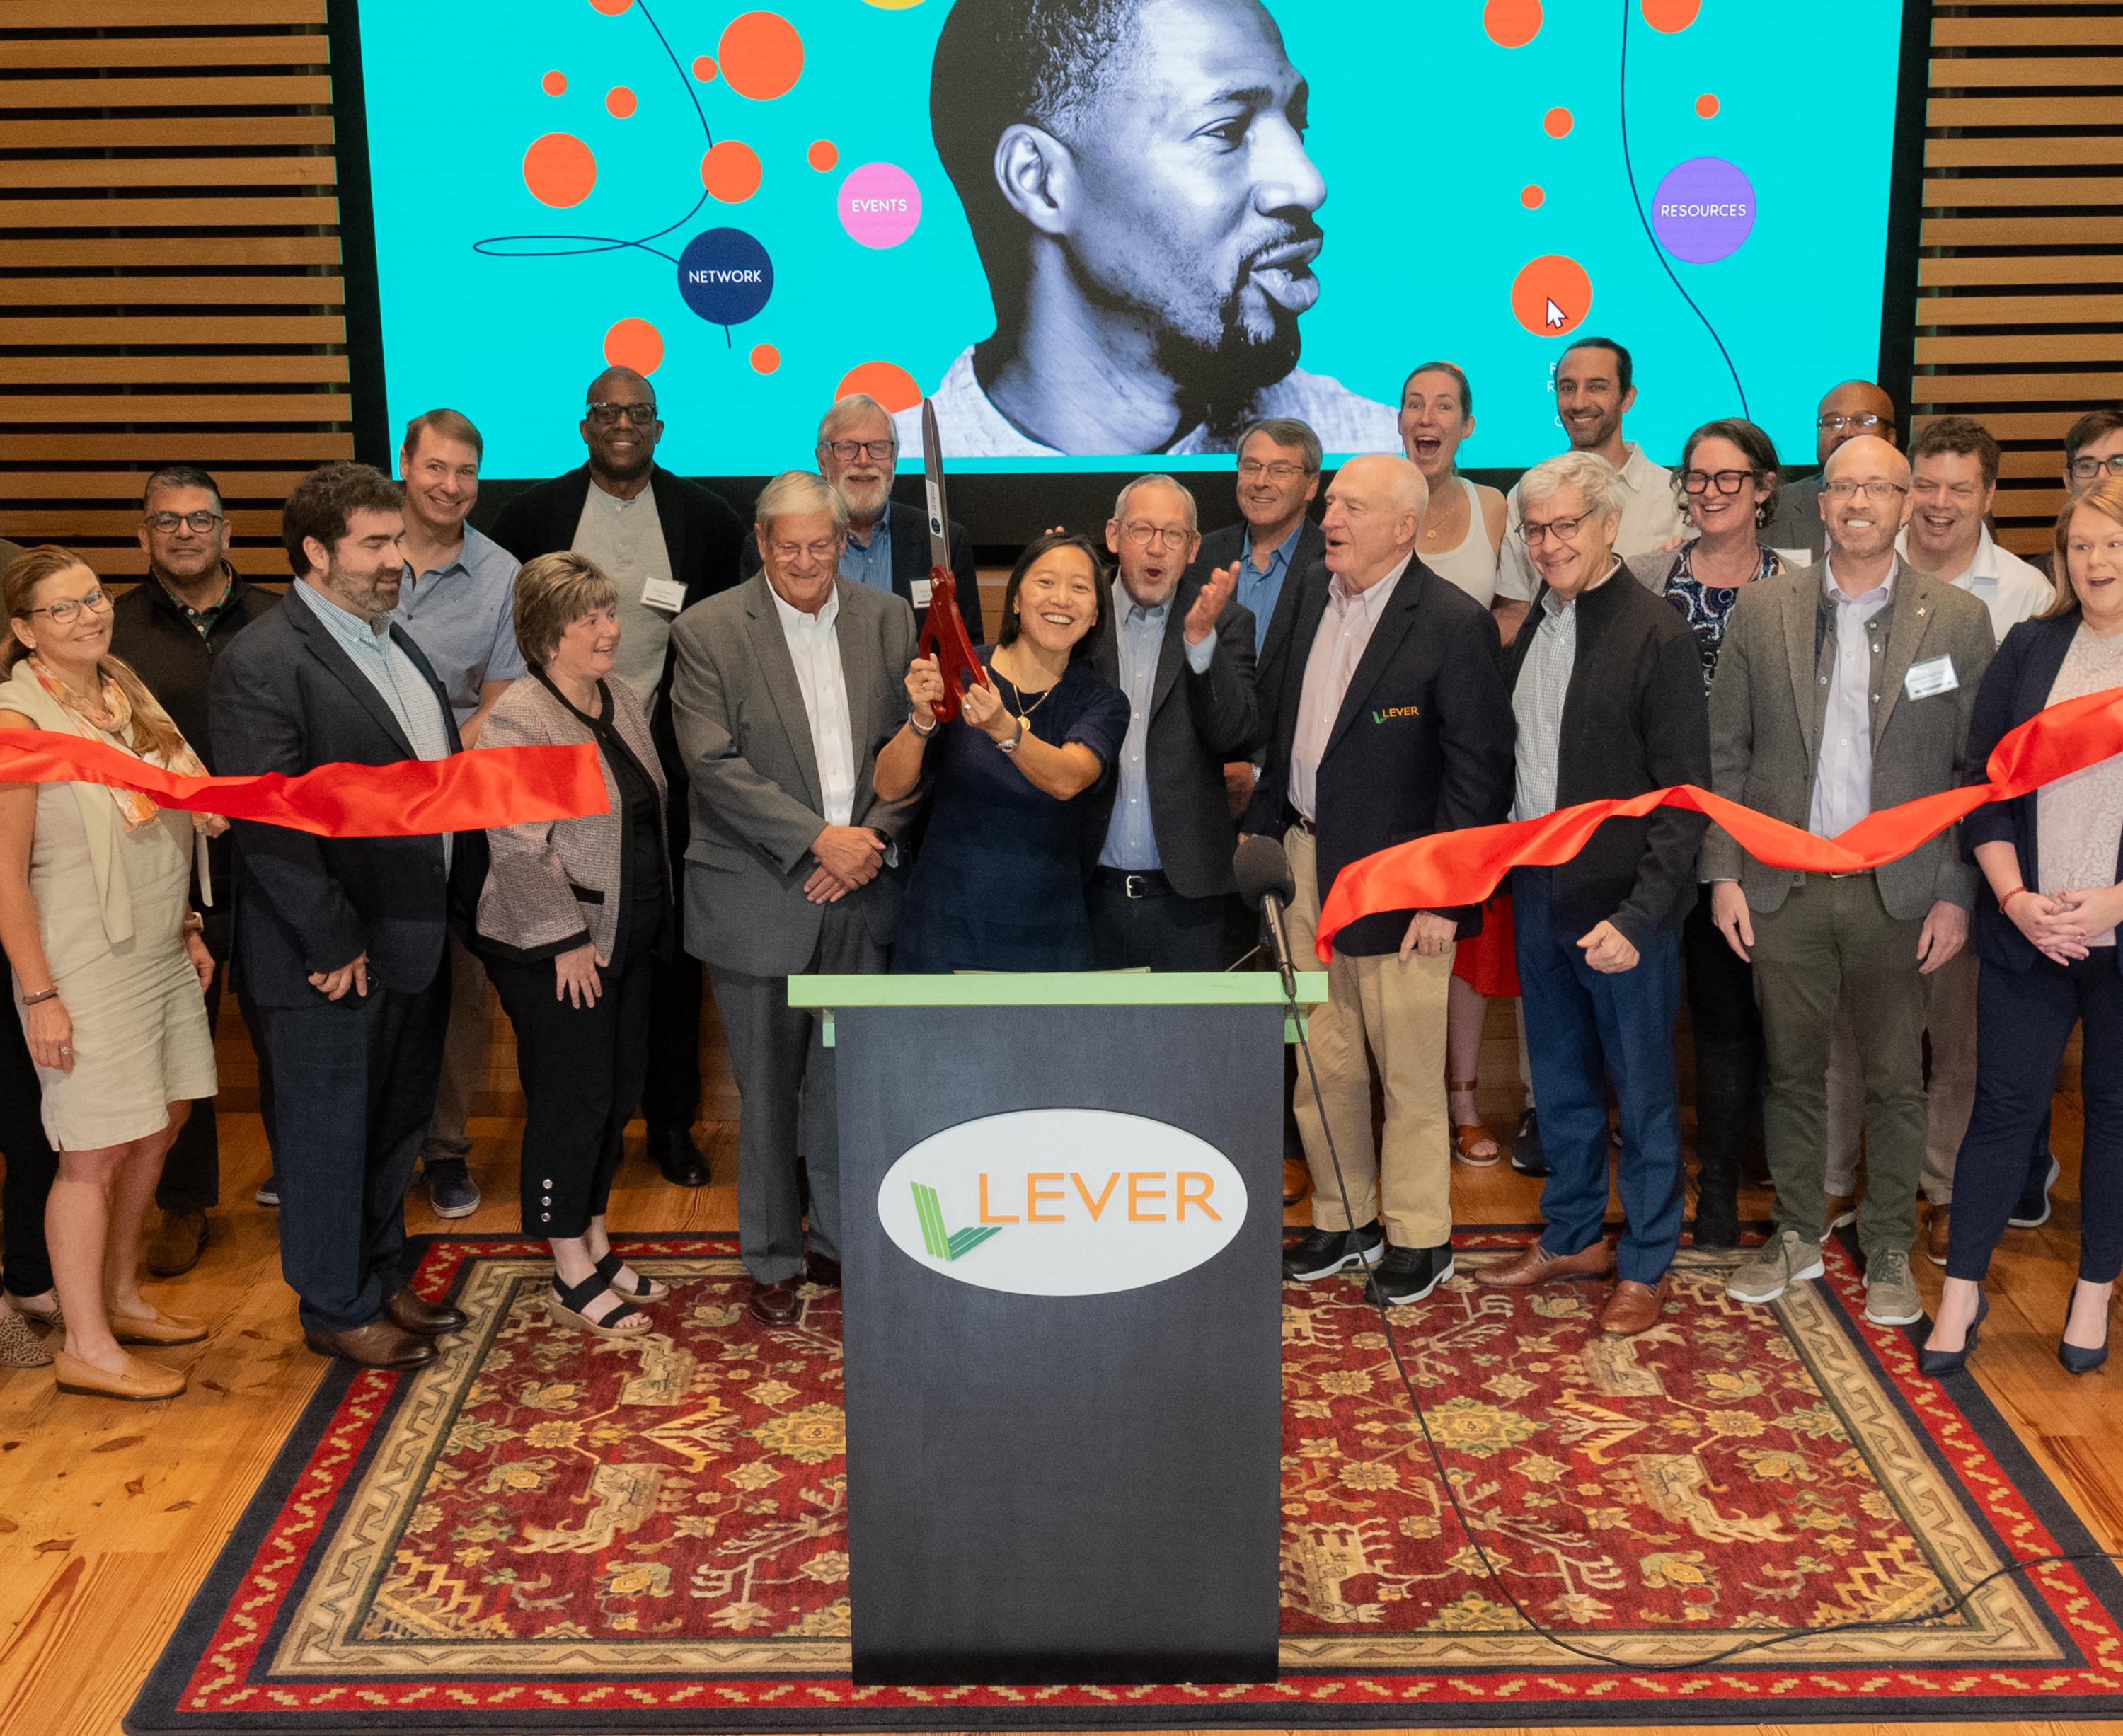 Executive Office of Economic Development (EOED) Secretary Yvonne Hao, center, Joins Lever and innovation ecosystem stakeholders from across the state for an official ribbon cutting for the Massachusetts Founders Network. Eric Korenman photo)